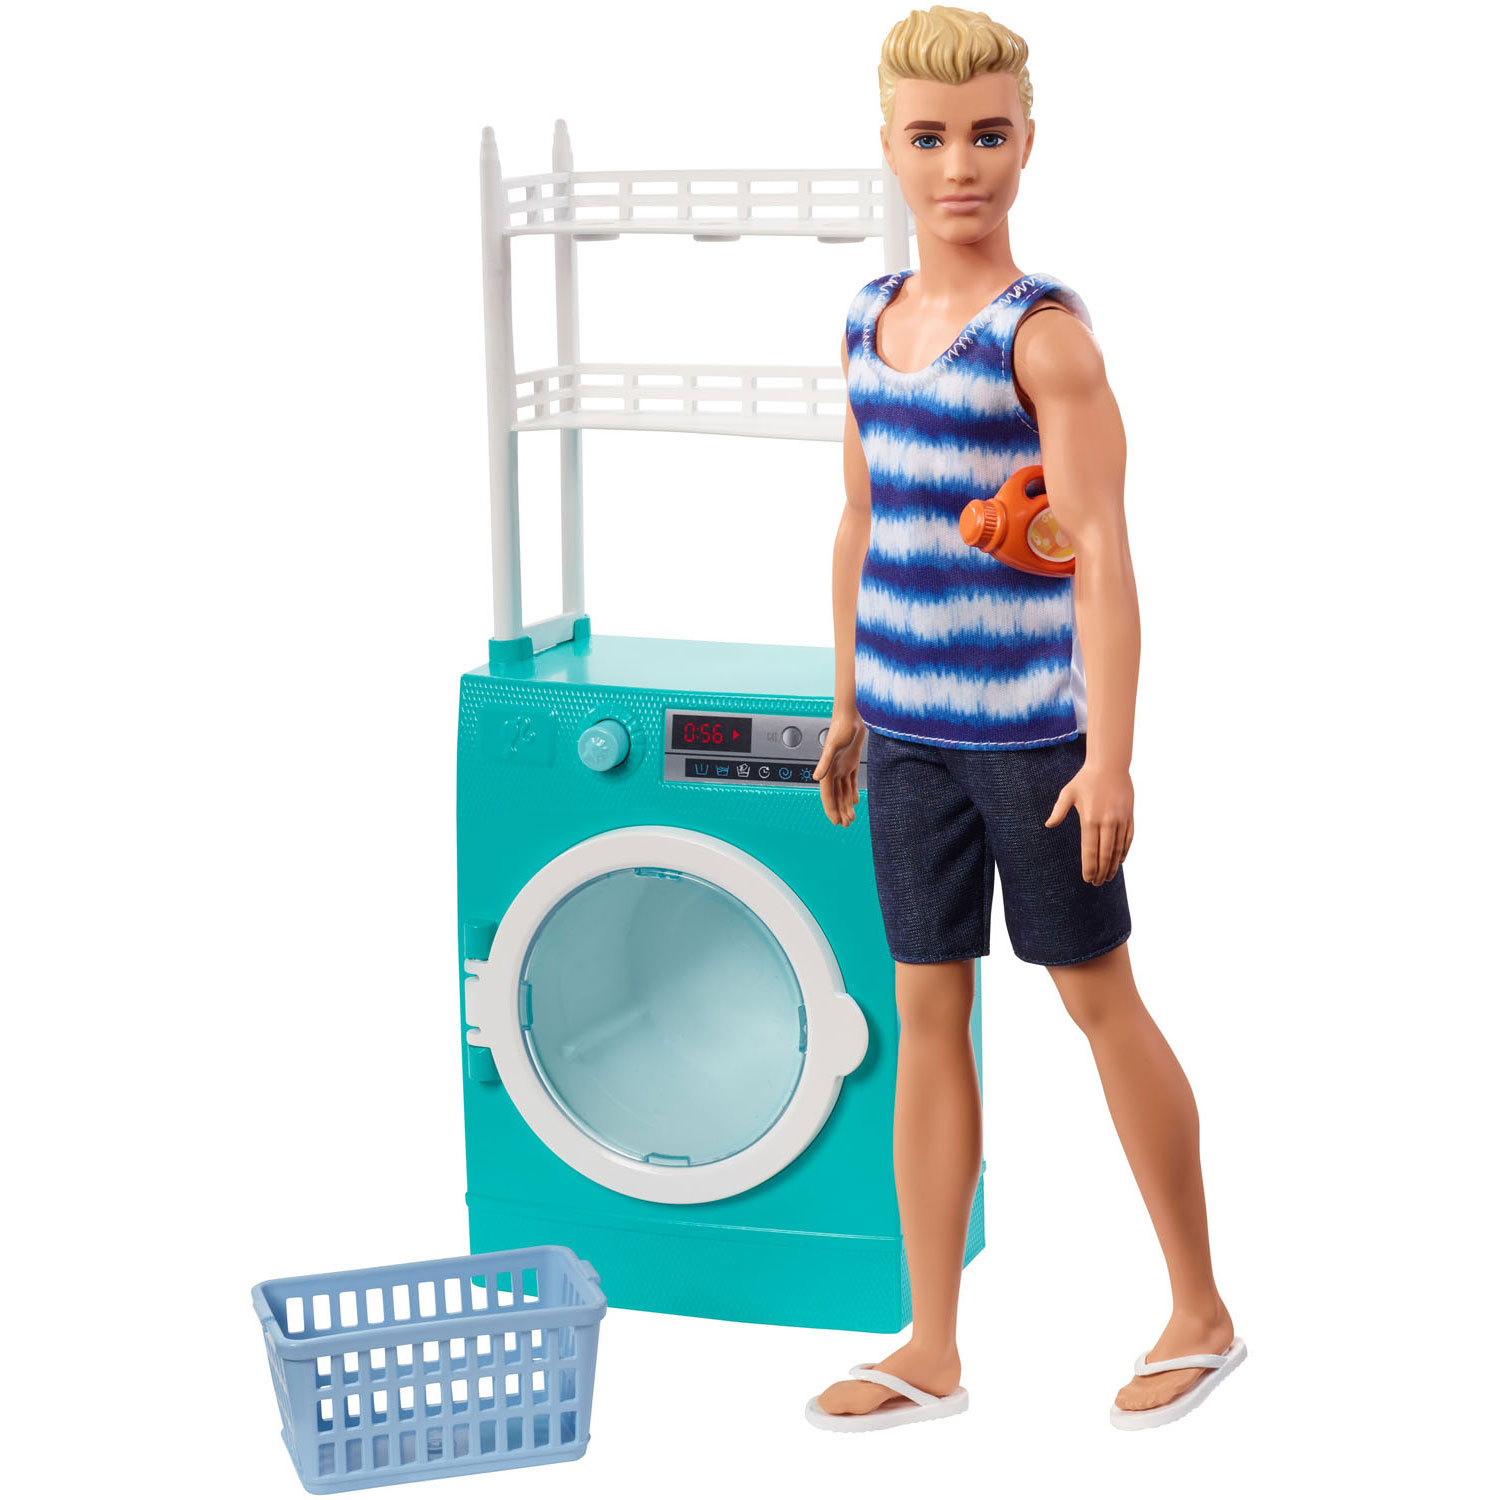 Ken does the laundry